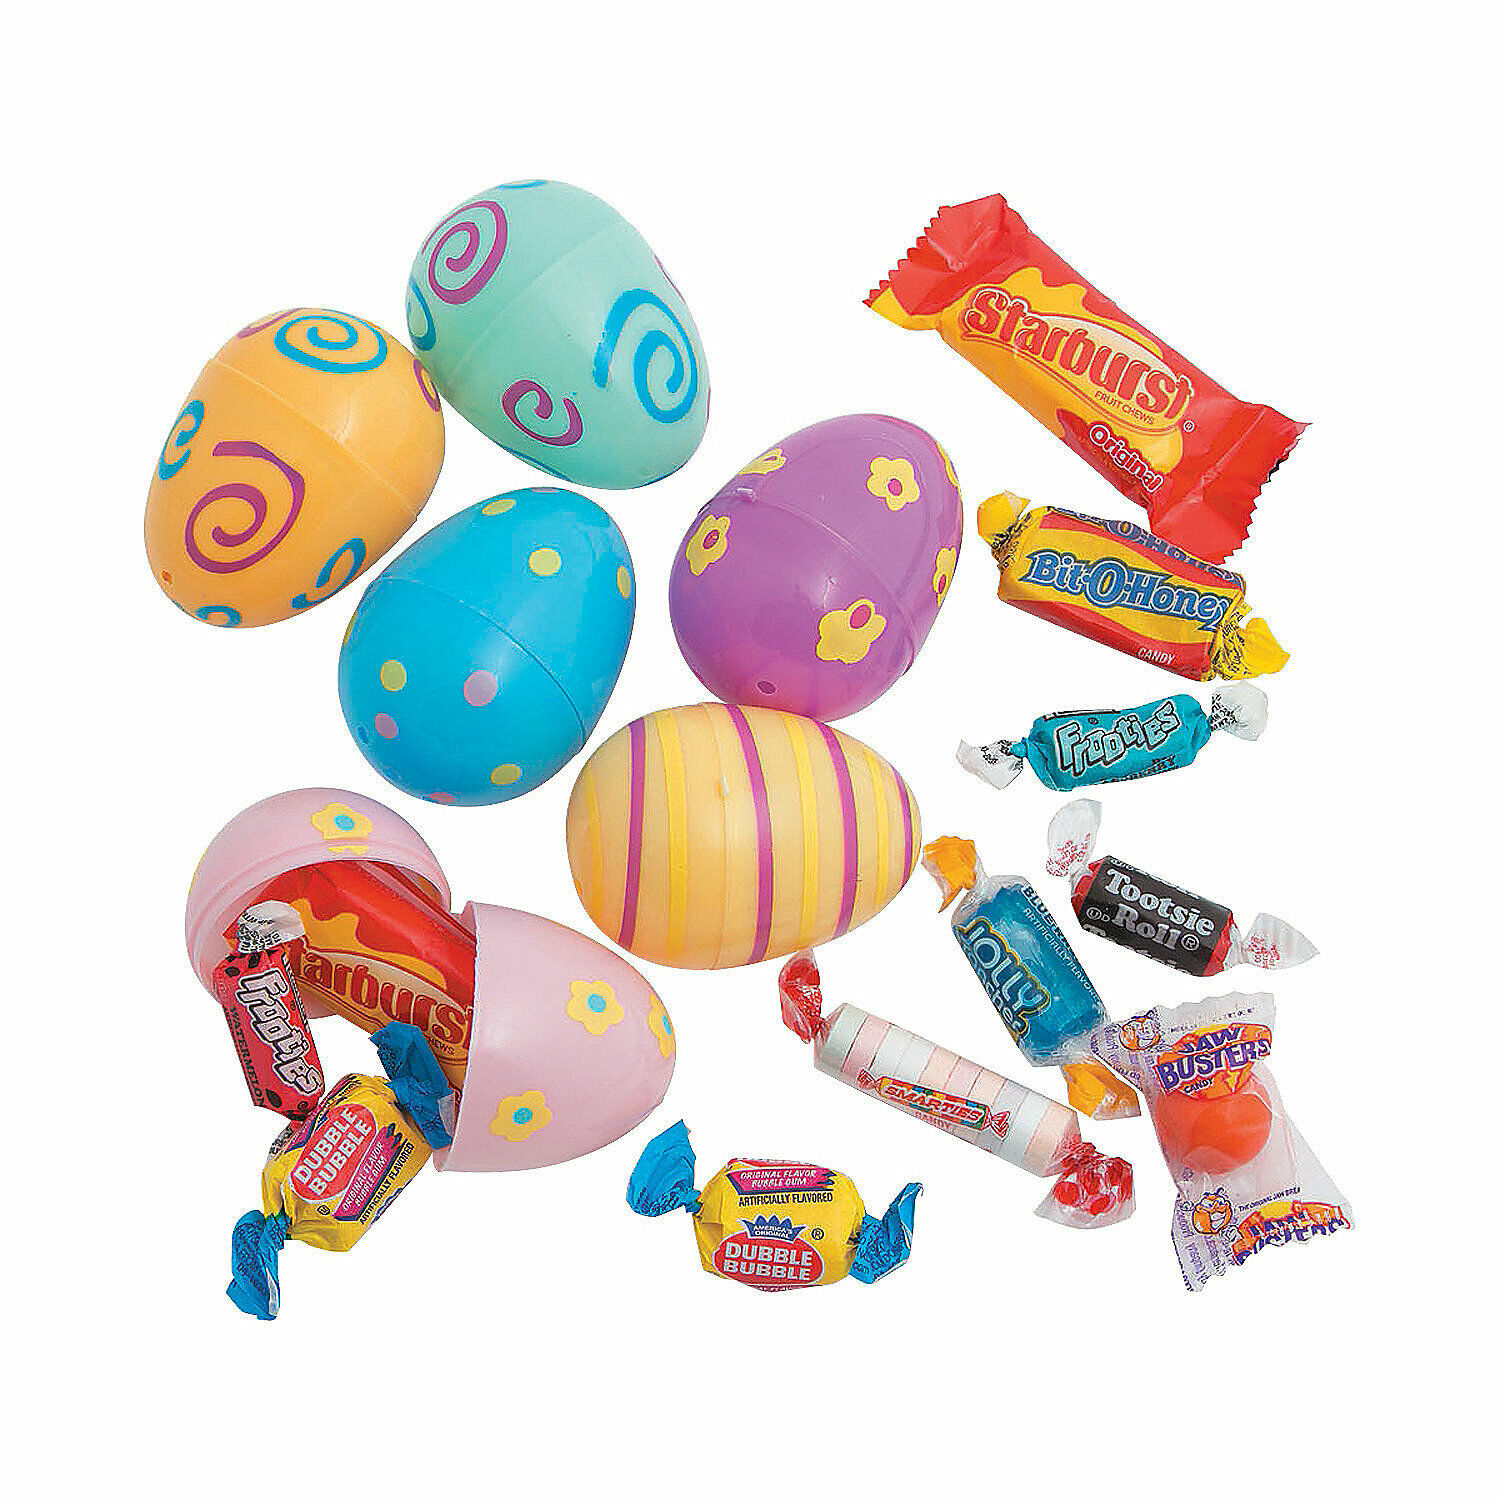 Pastel Printed Candy-Filled Plastic Easter Eggs - 24 Pc.